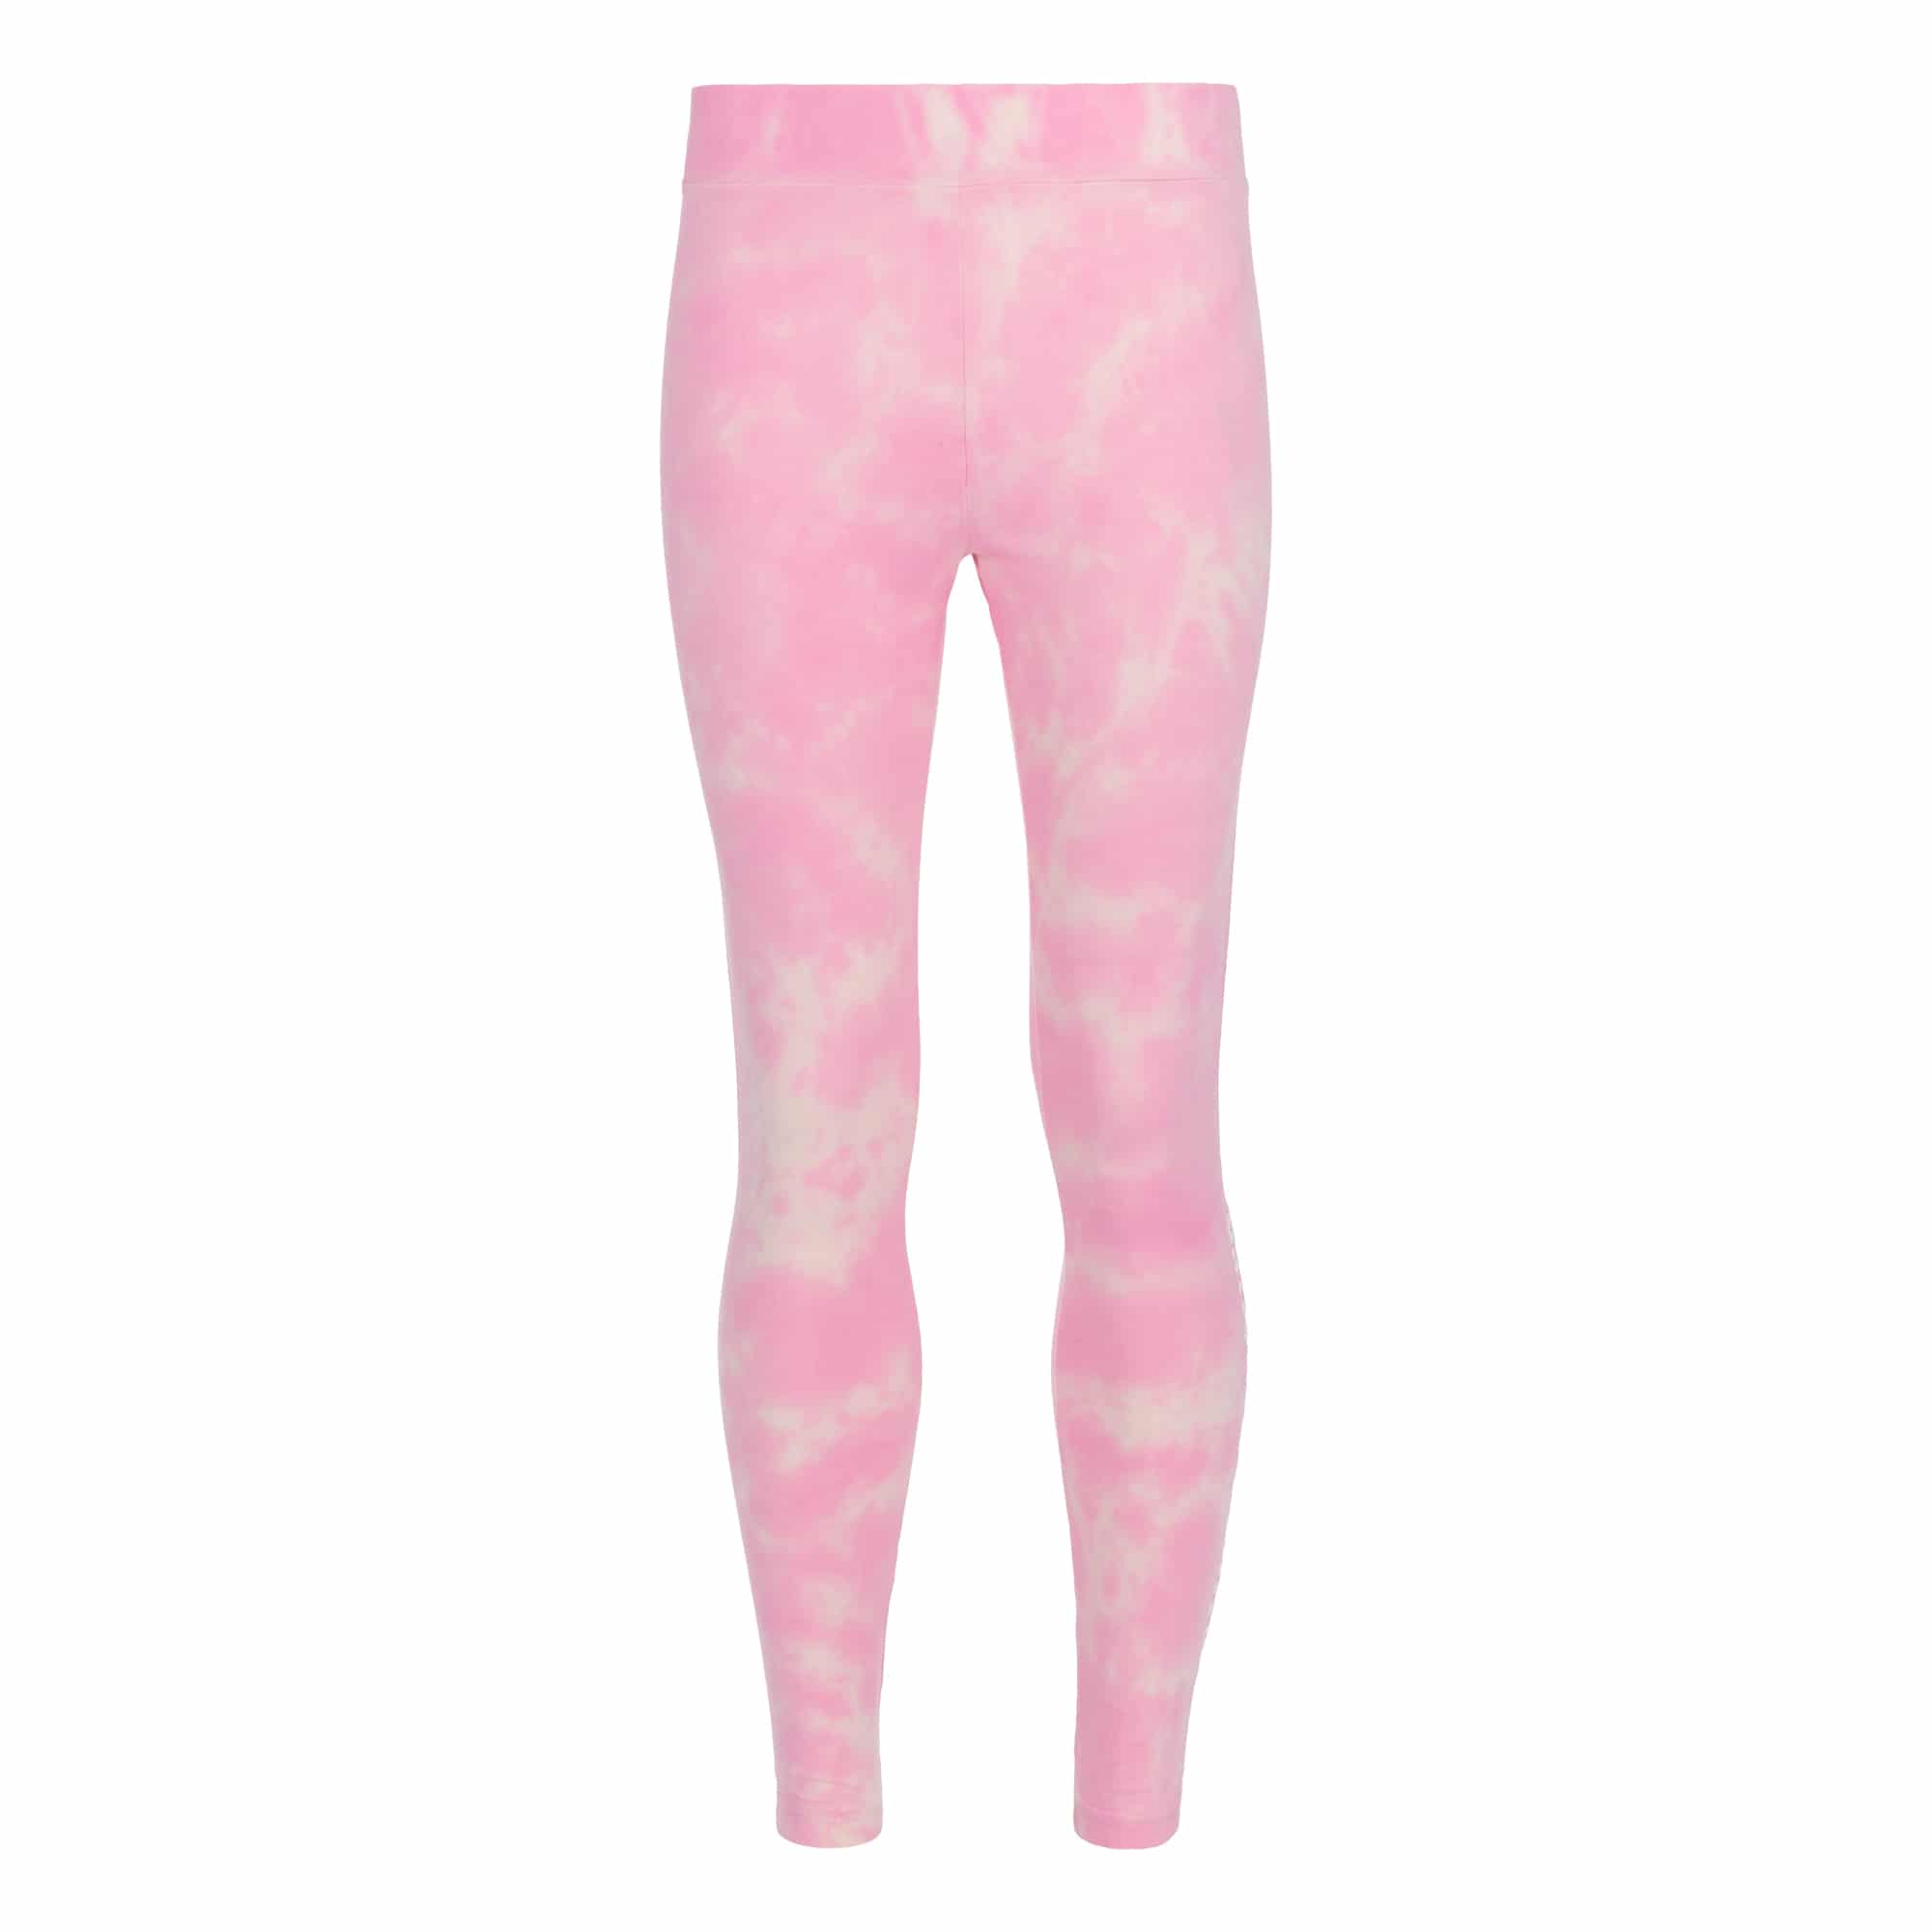 Juicy Couture girls pink tie dye leggings front view